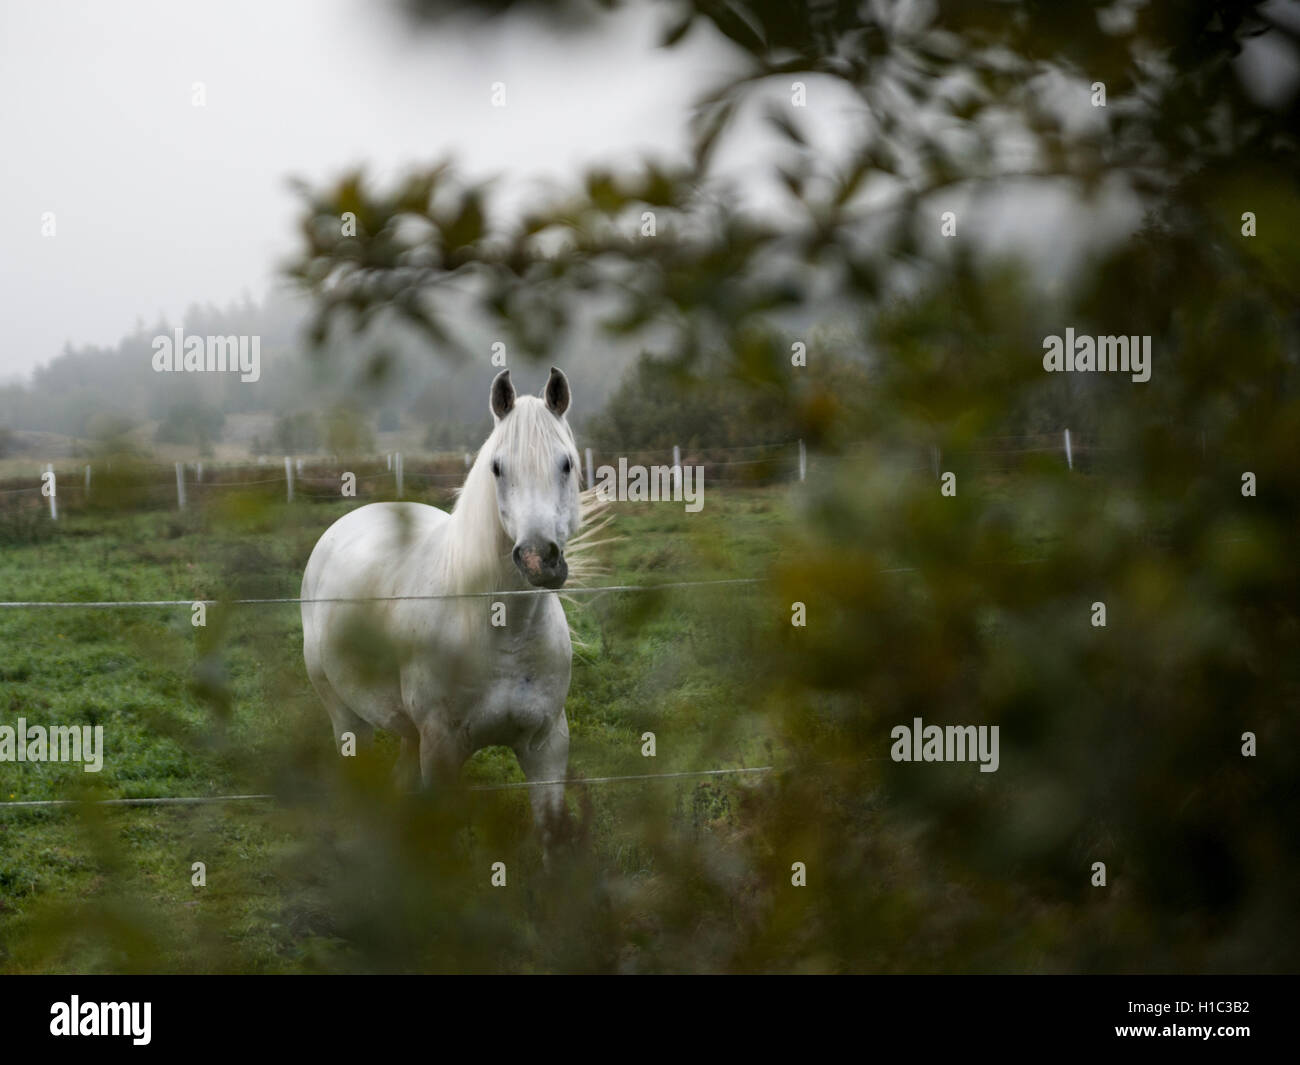 A white horse standing in a field with a tree in the foreground Stock Photo